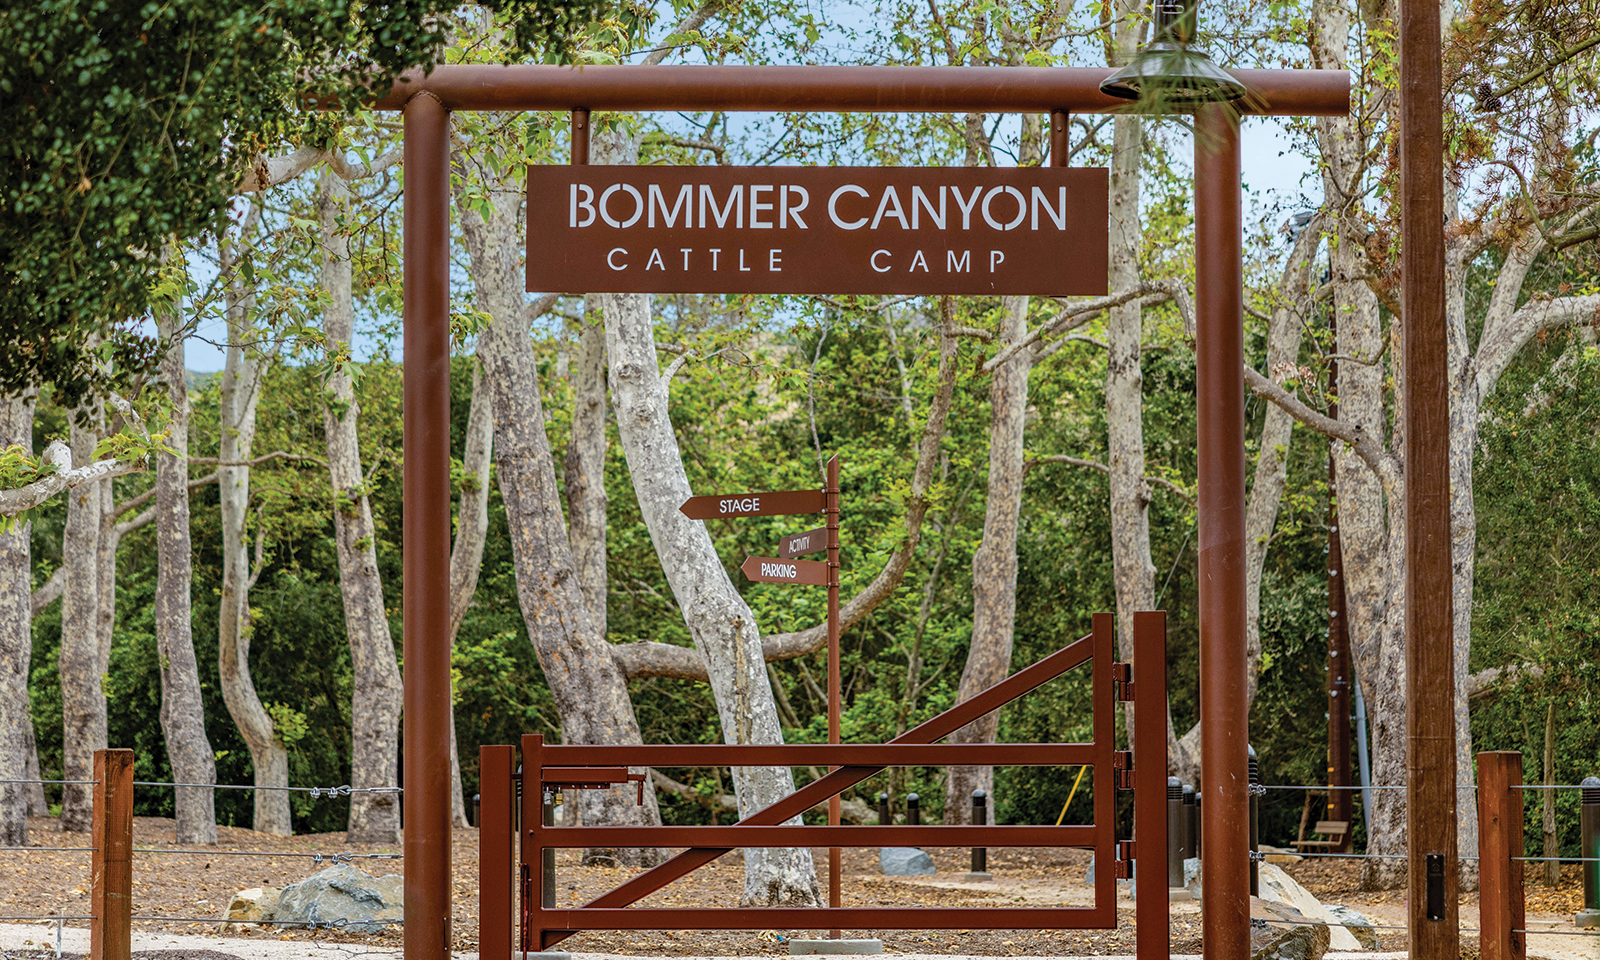 Enhanced Bommer Canyon Cattle Camp reopens for weddings, private parties